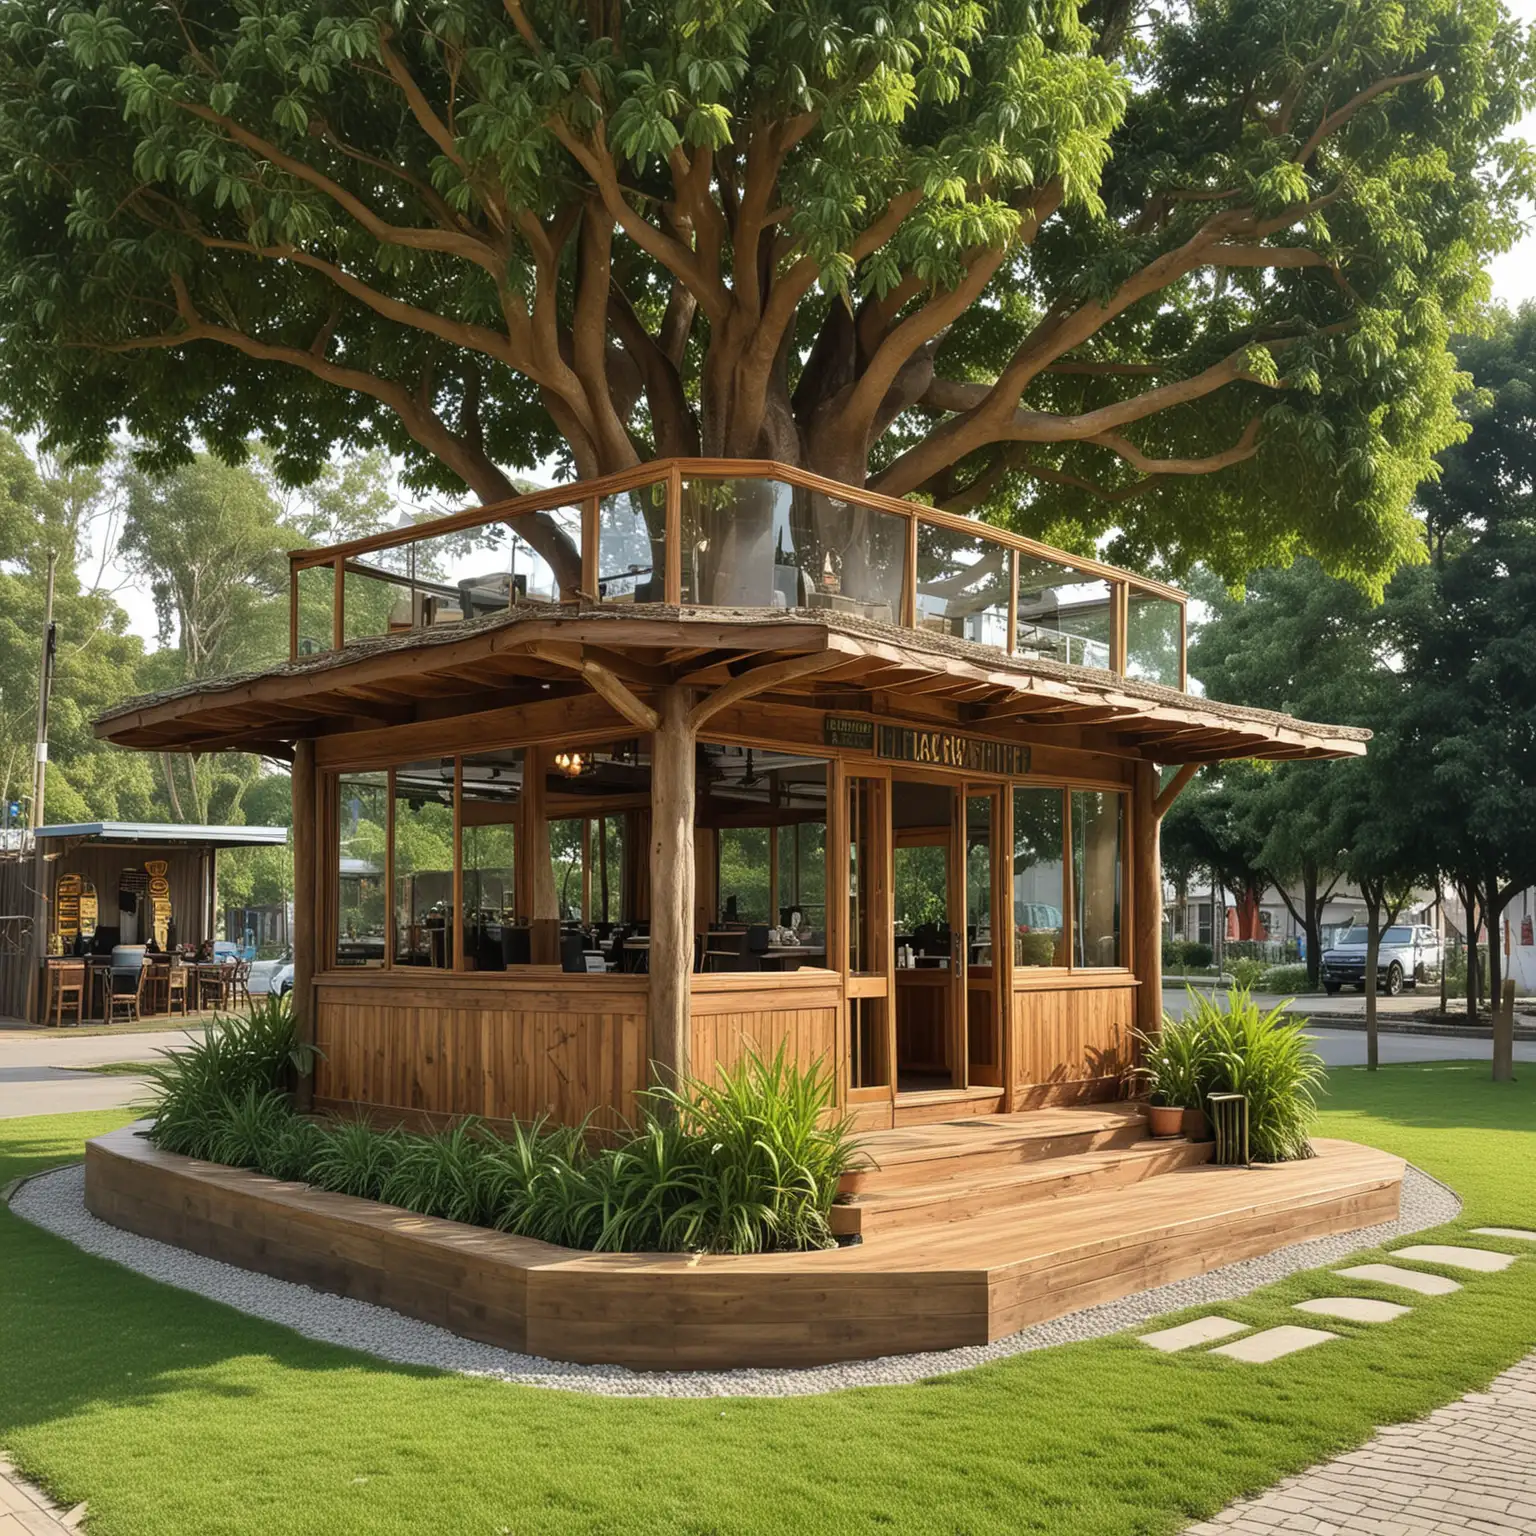 TwoStory StandAlone Coffee Shop with Outdoor Garden